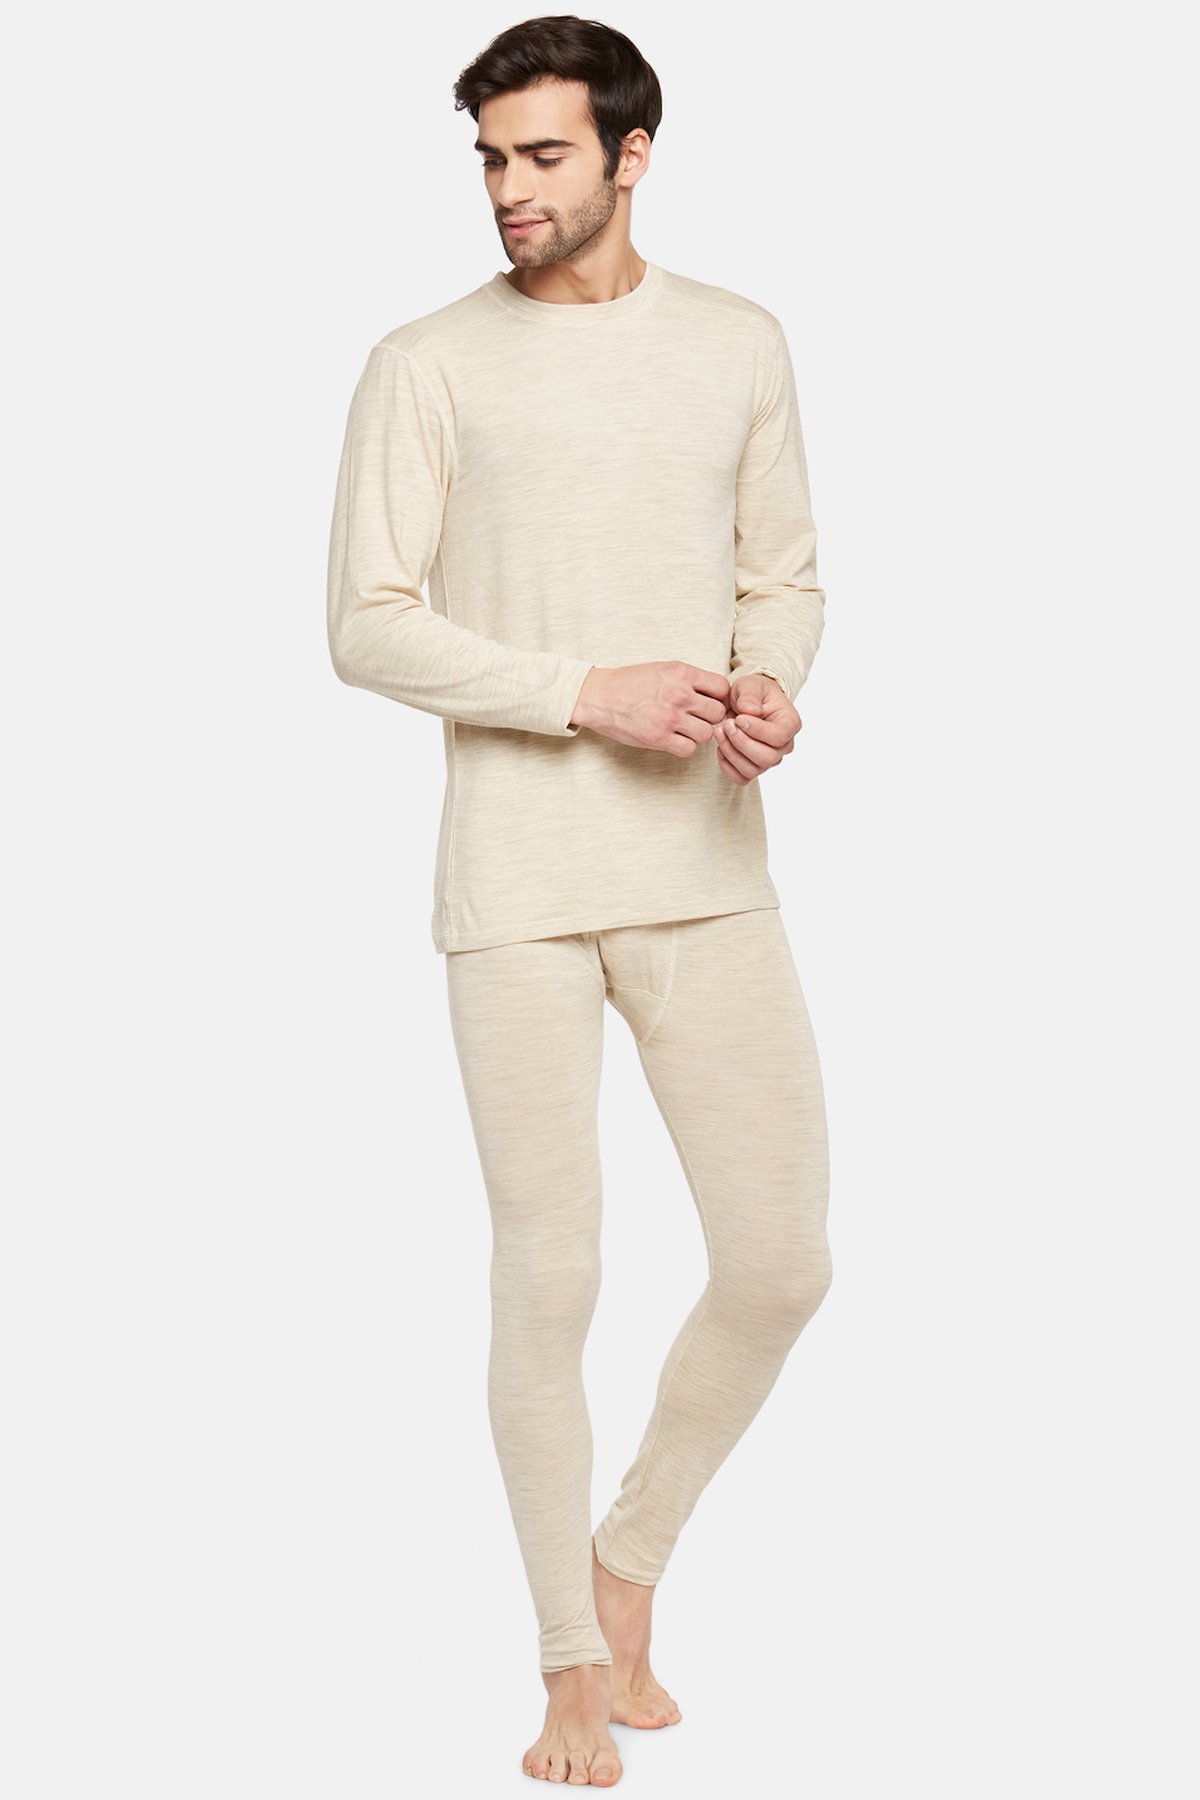 Woolen Thermals Shop Discounted, Save 46% | jlcatj.gob.mx